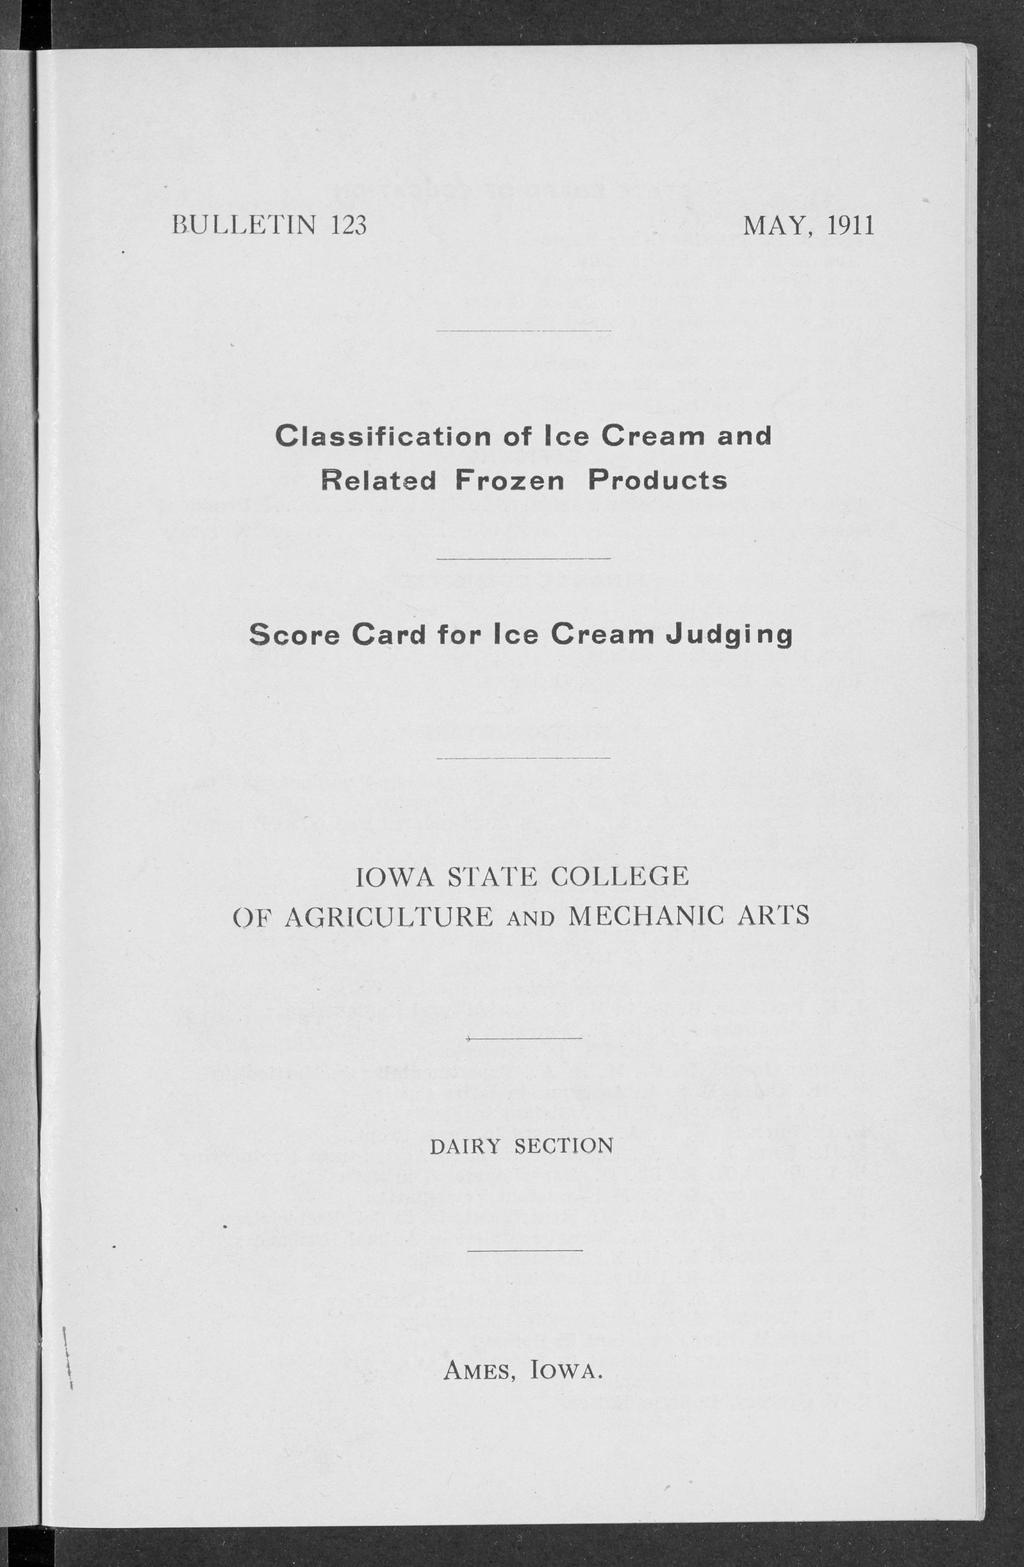 Mortensen: Classification of ice cream and related frozen products BULLETIN 123 MAY, 1911 C lassification of Ice C ream and Related Frozen Products Score Card for